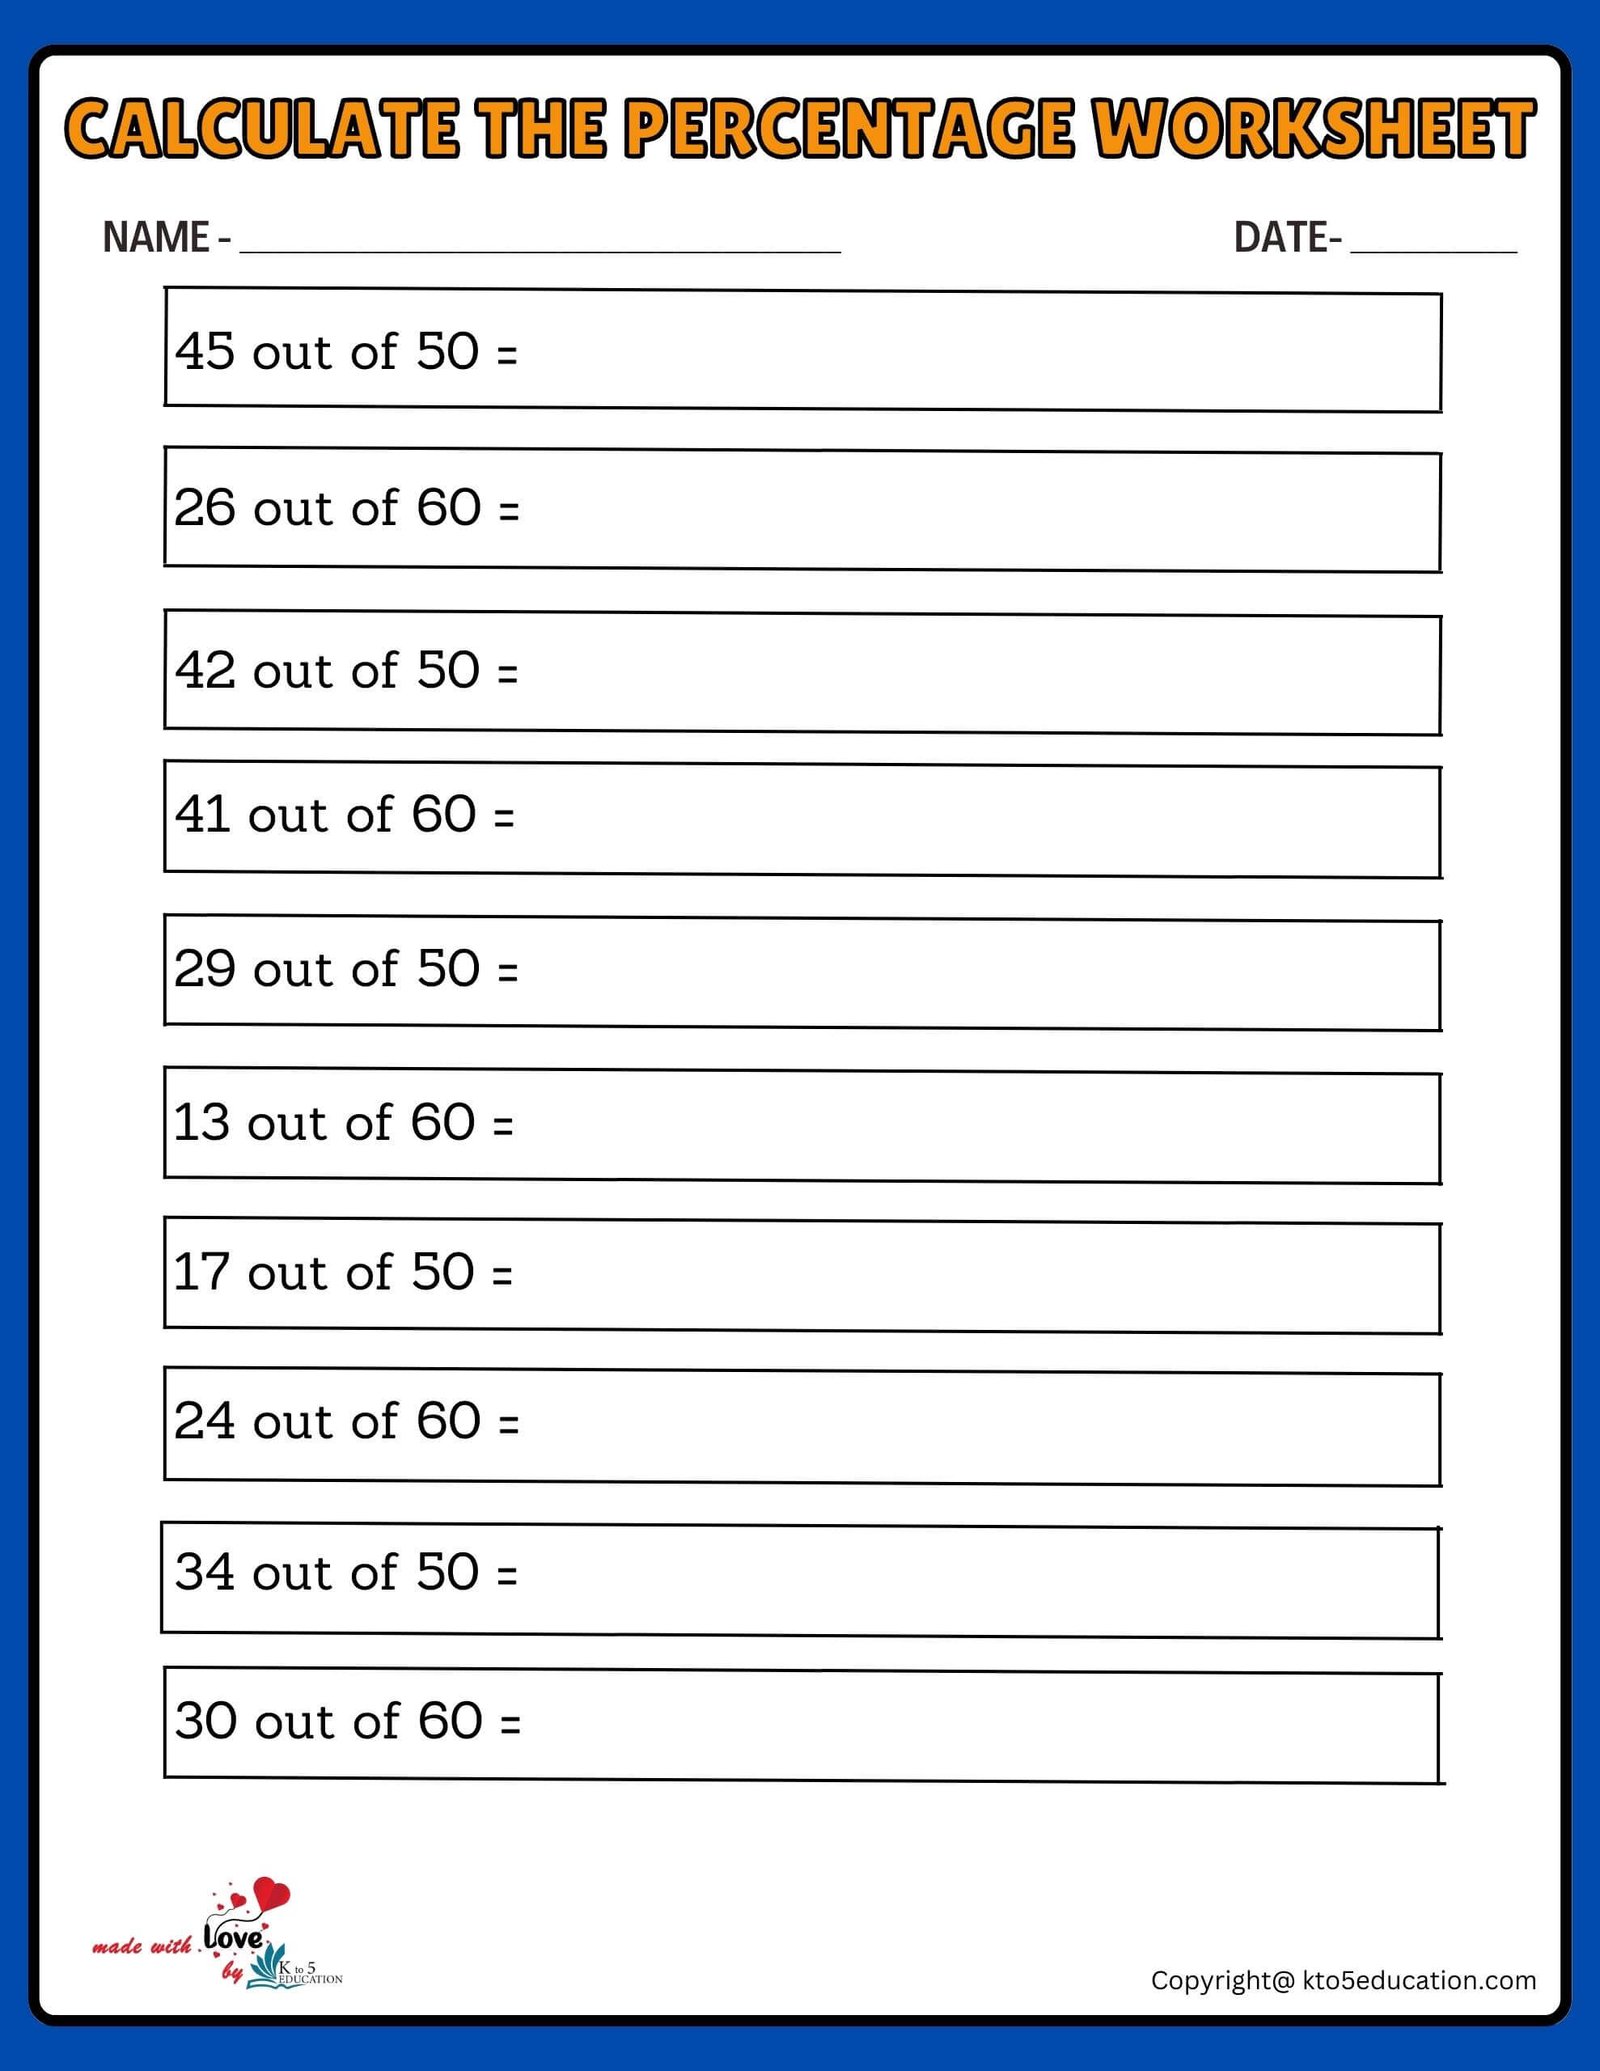 Calculate With Percentage 50 To 60 Worksheet